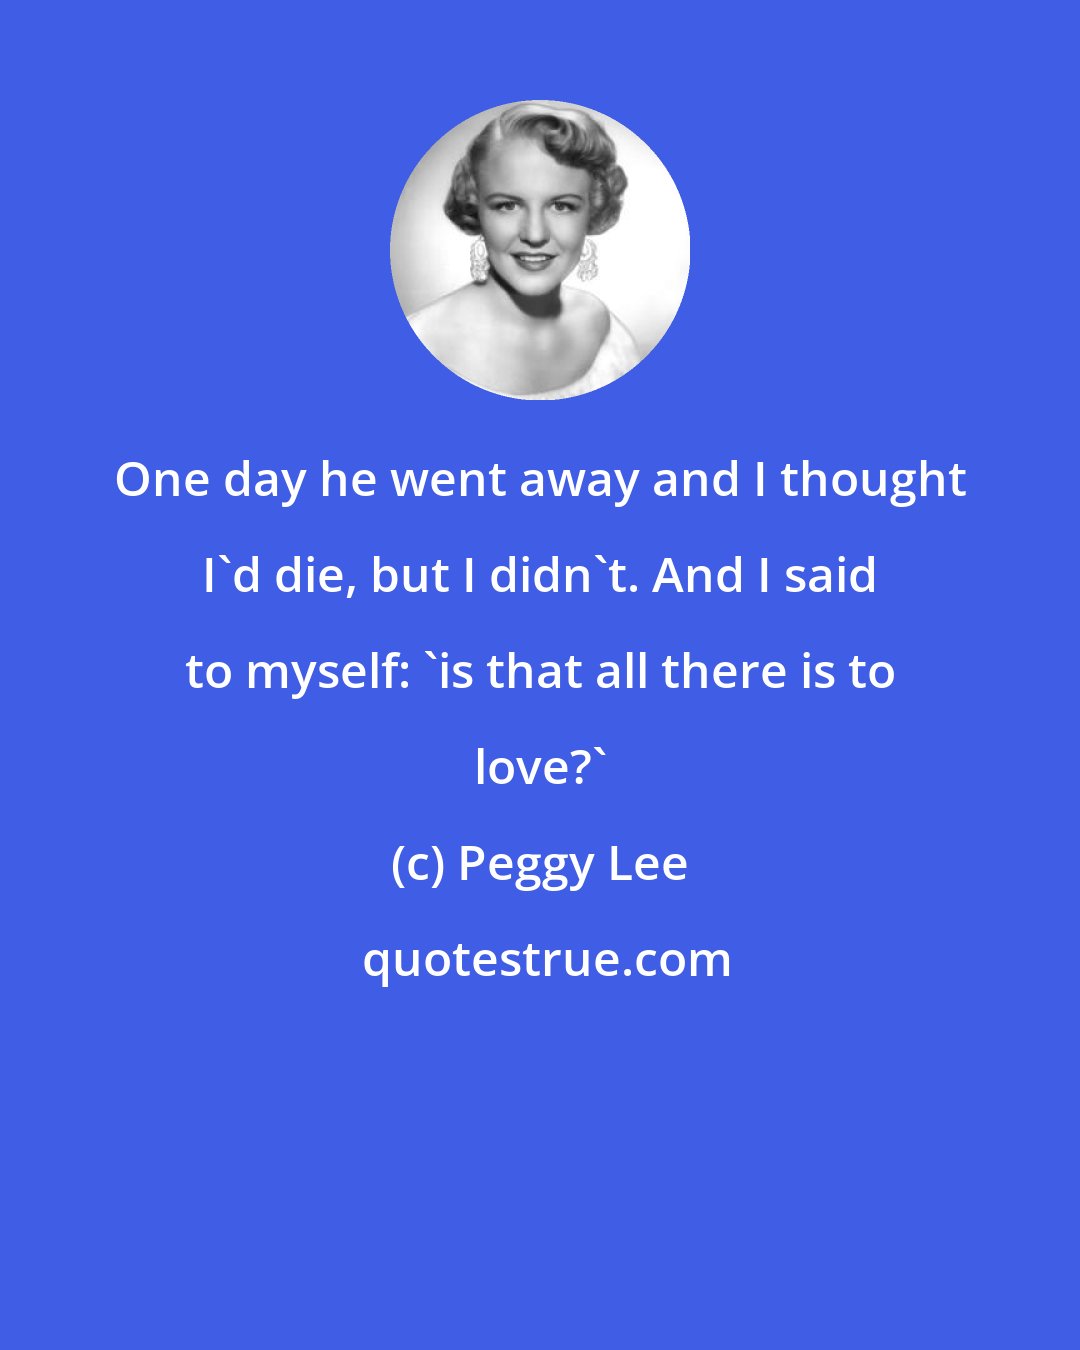 Peggy Lee: One day he went away and I thought I'd die, but I didn't. And I said to myself: 'is that all there is to love?'